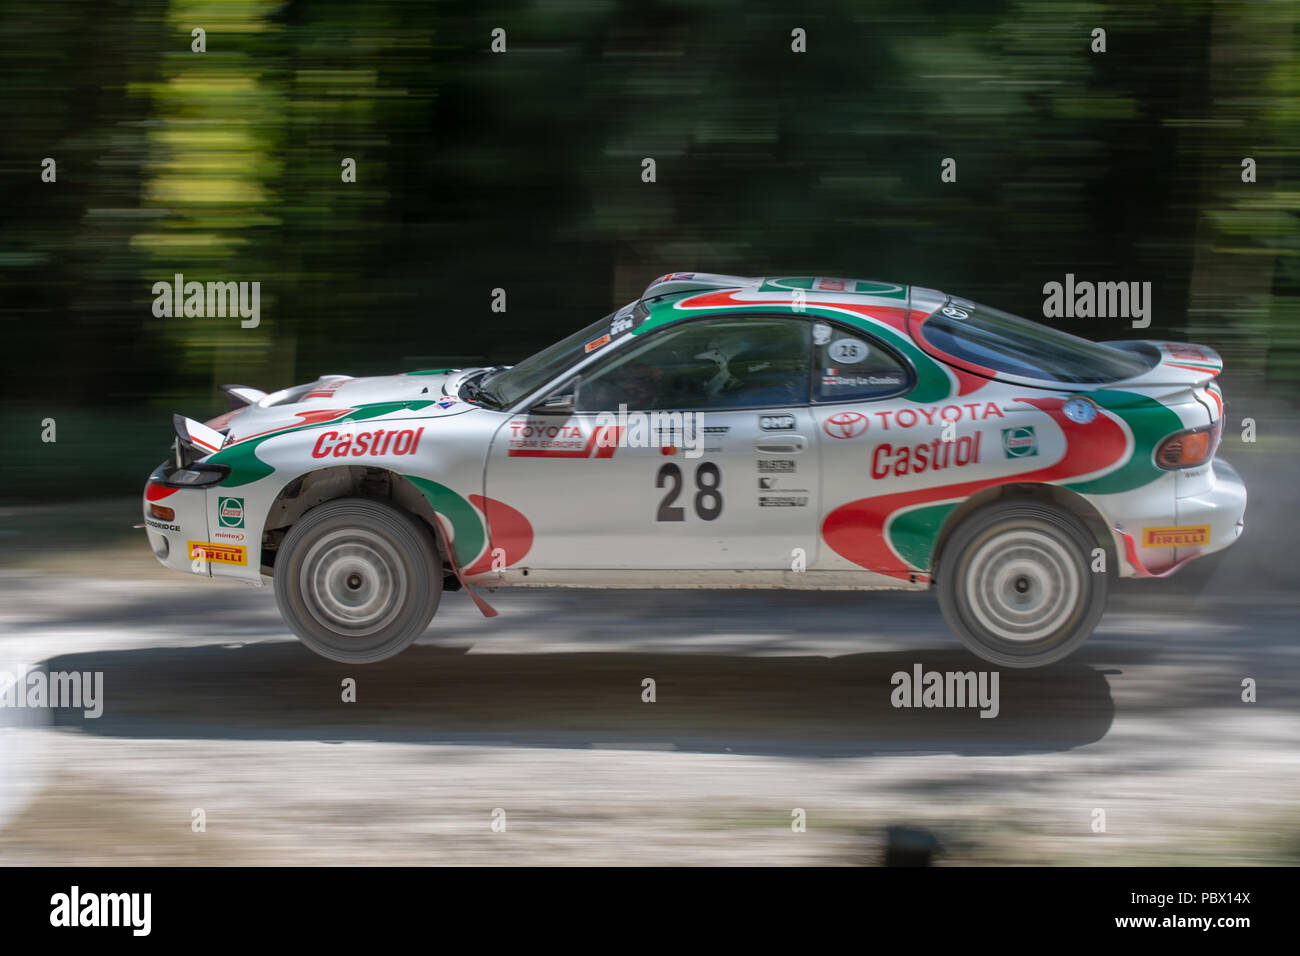 A Toyota Celica GT-Four ST185 rally car leaps through the air while racing through the forest rally stages at the Goodwood Festival of Speed 2018 Stock Photo